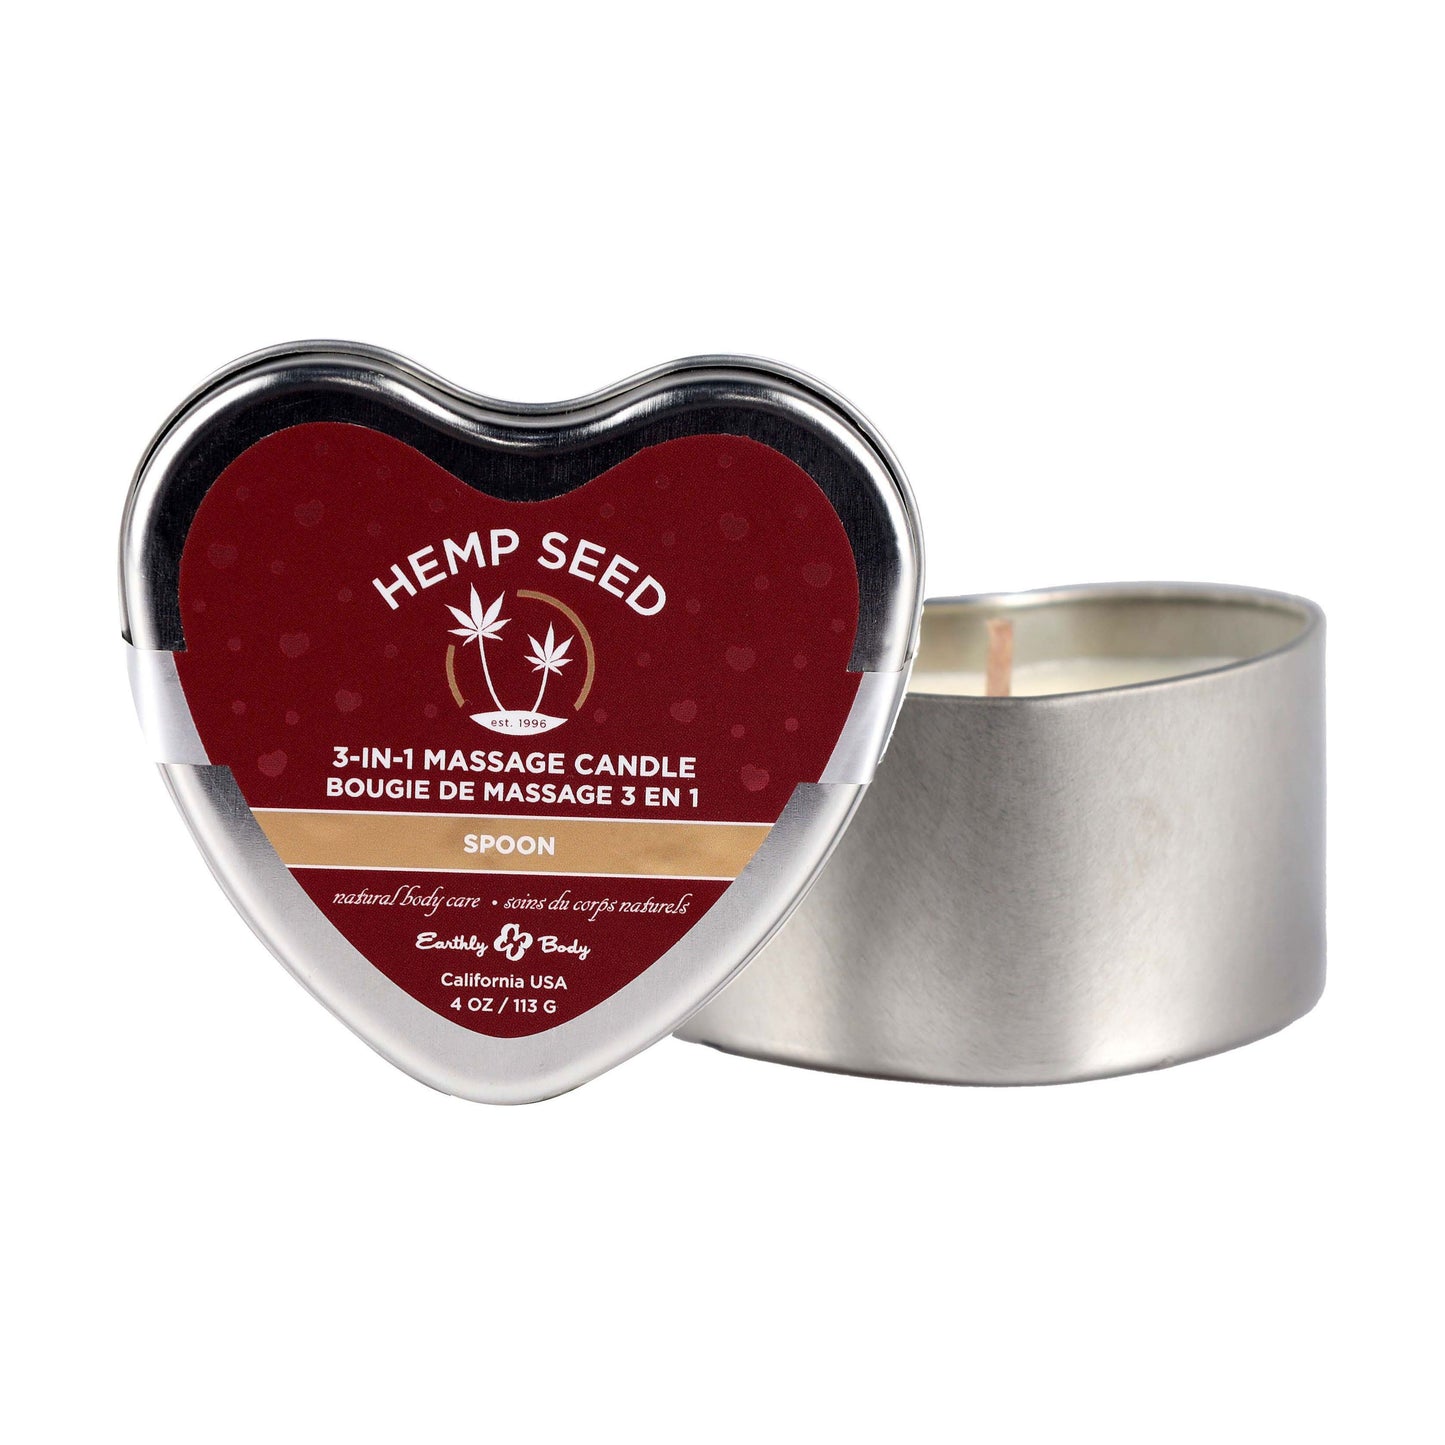 3-in-1 Massage Candle - Spoon - 4 Oz EB-HSCV023C